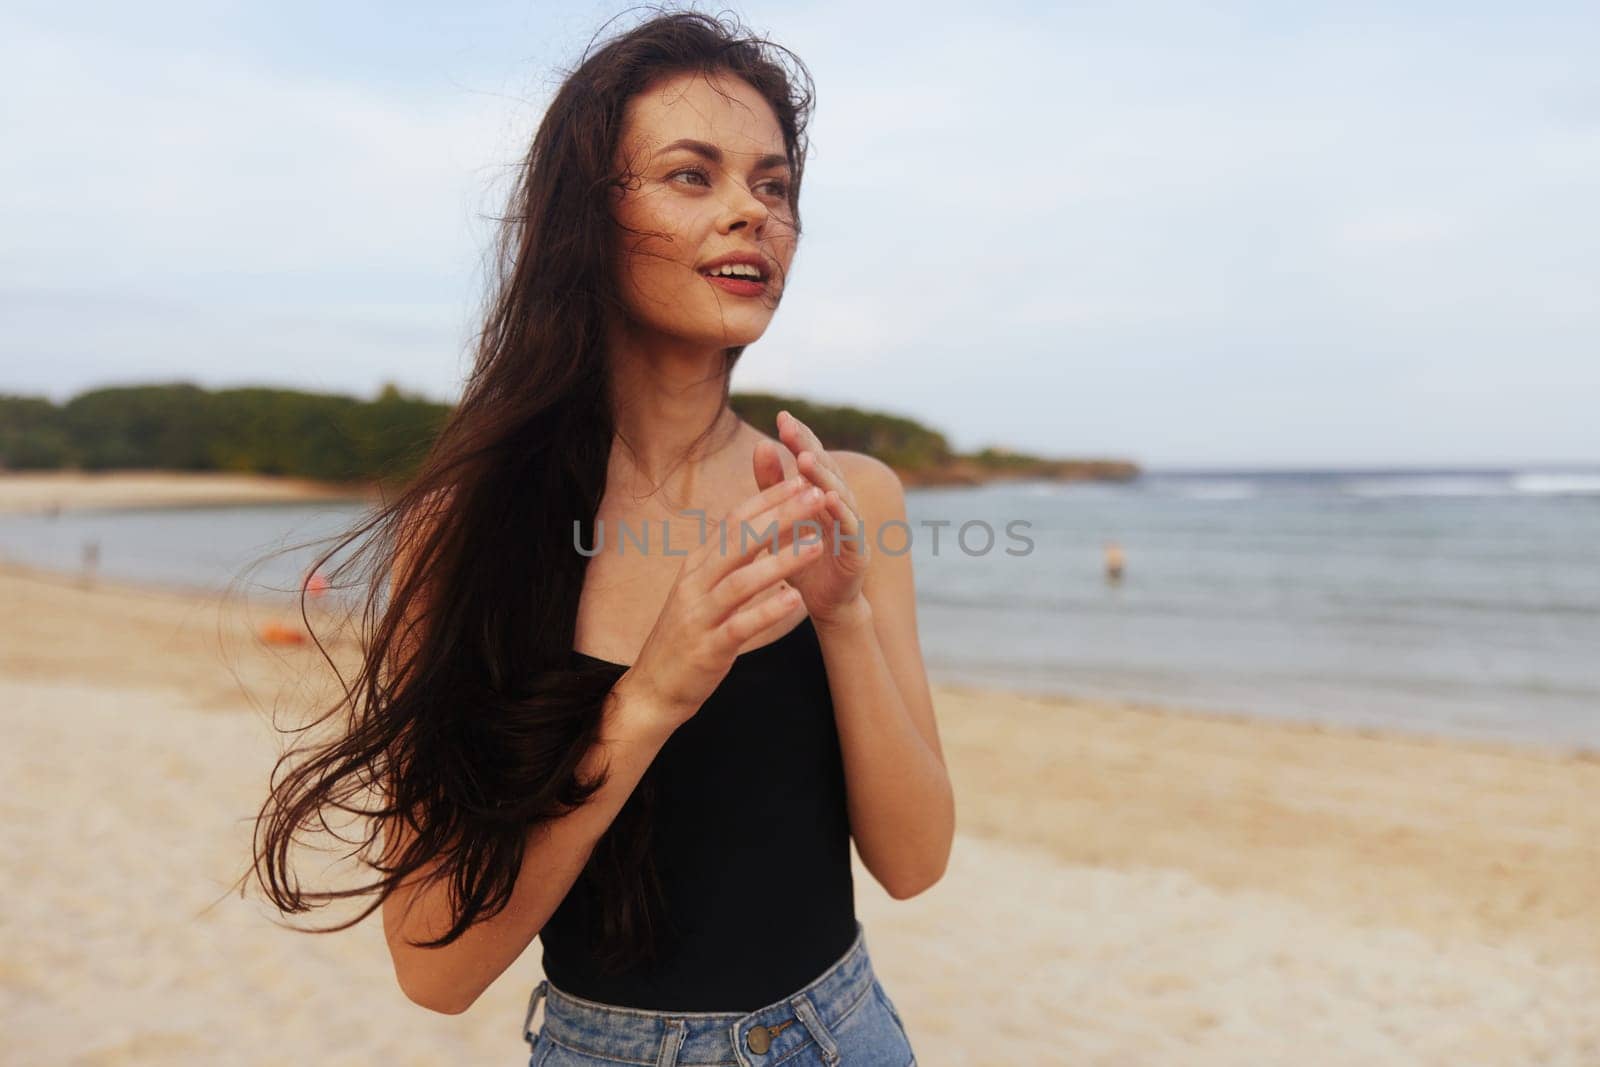 woman beautiful sand beach sunset running lifestyle vacation dress sea sky beauty young smile copy-space carefree peaceful happy leisure summer ocean